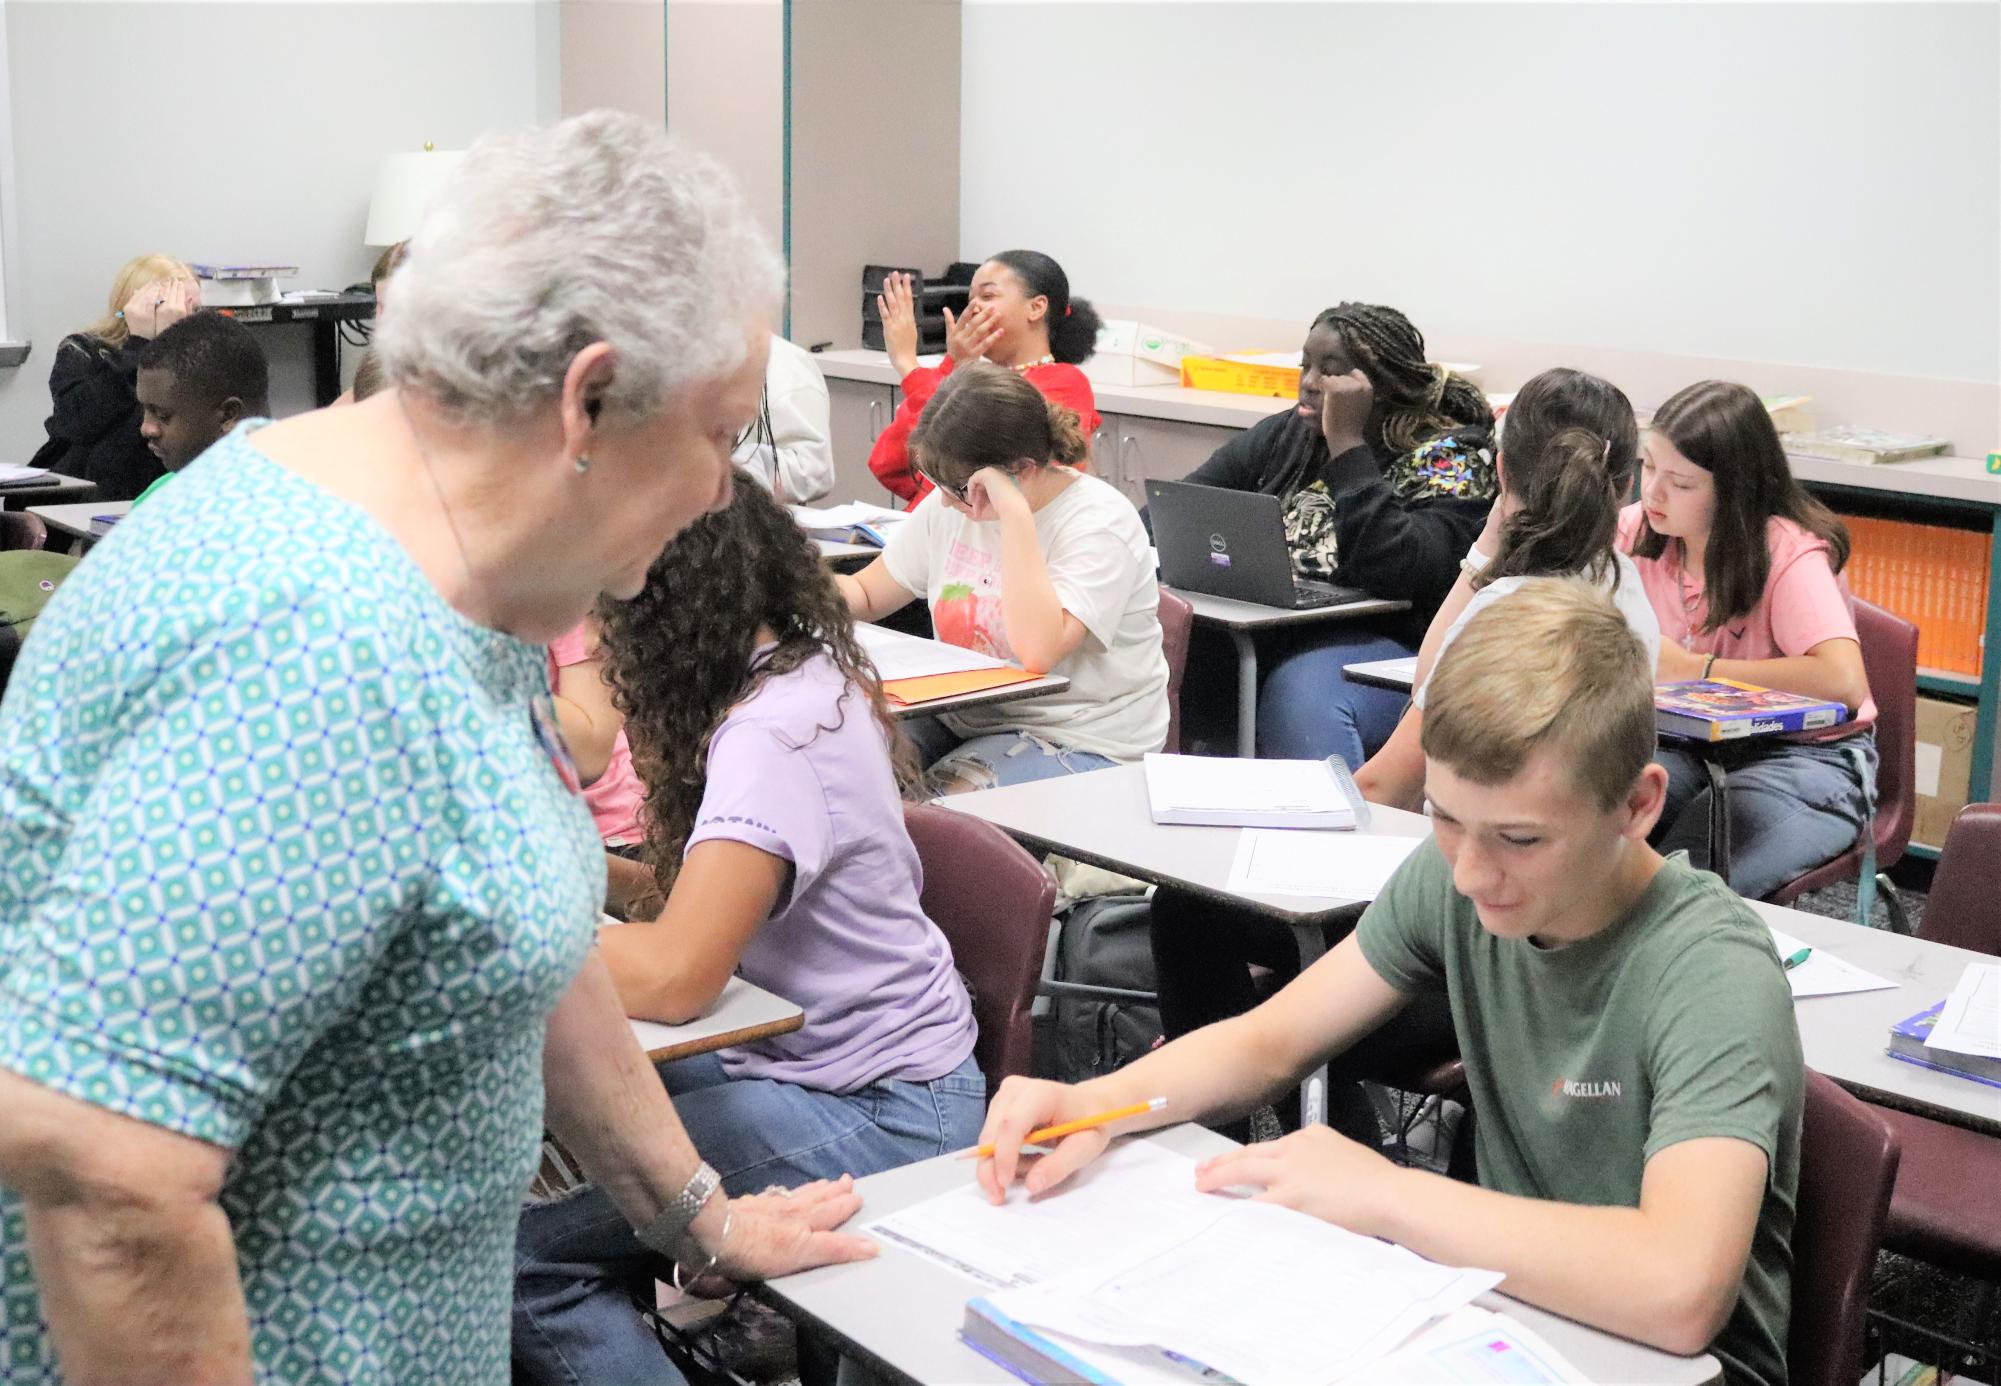 HABLA ESPANOL. Helping sophomore Ashton Stanley with his assignment, Spanish teacher Pat Kercheval teaches her 6th period class. Kercheval began her 50th year teaching in August.